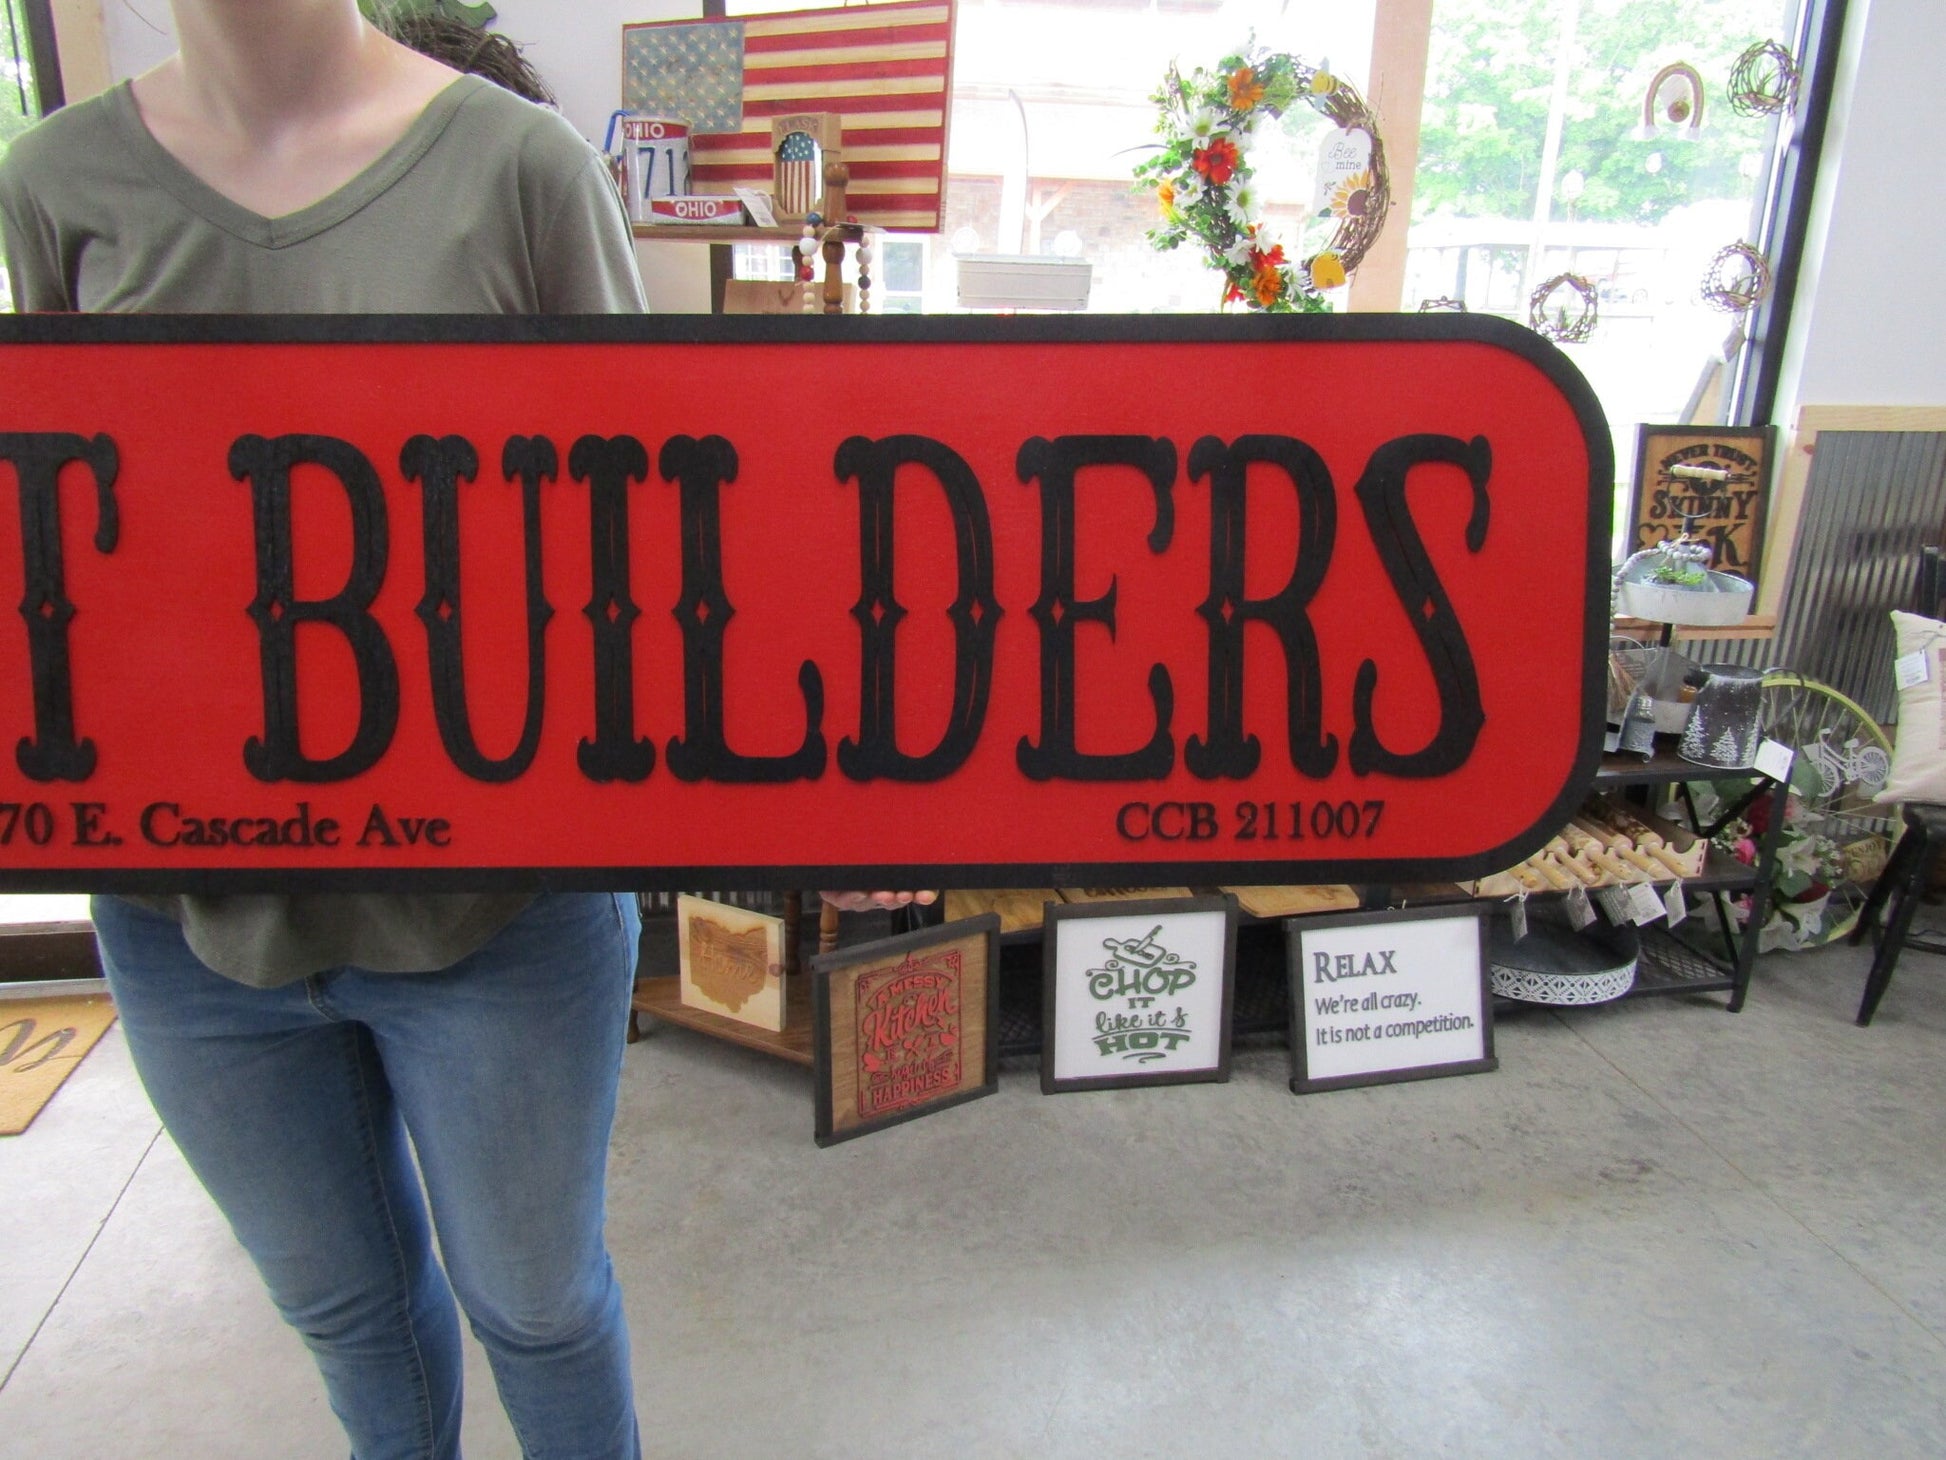 Custom Builders Sign Distressed Rustic Red and Black Personalized Business Company Name Store Front Wooden Handmade Commerical Signage